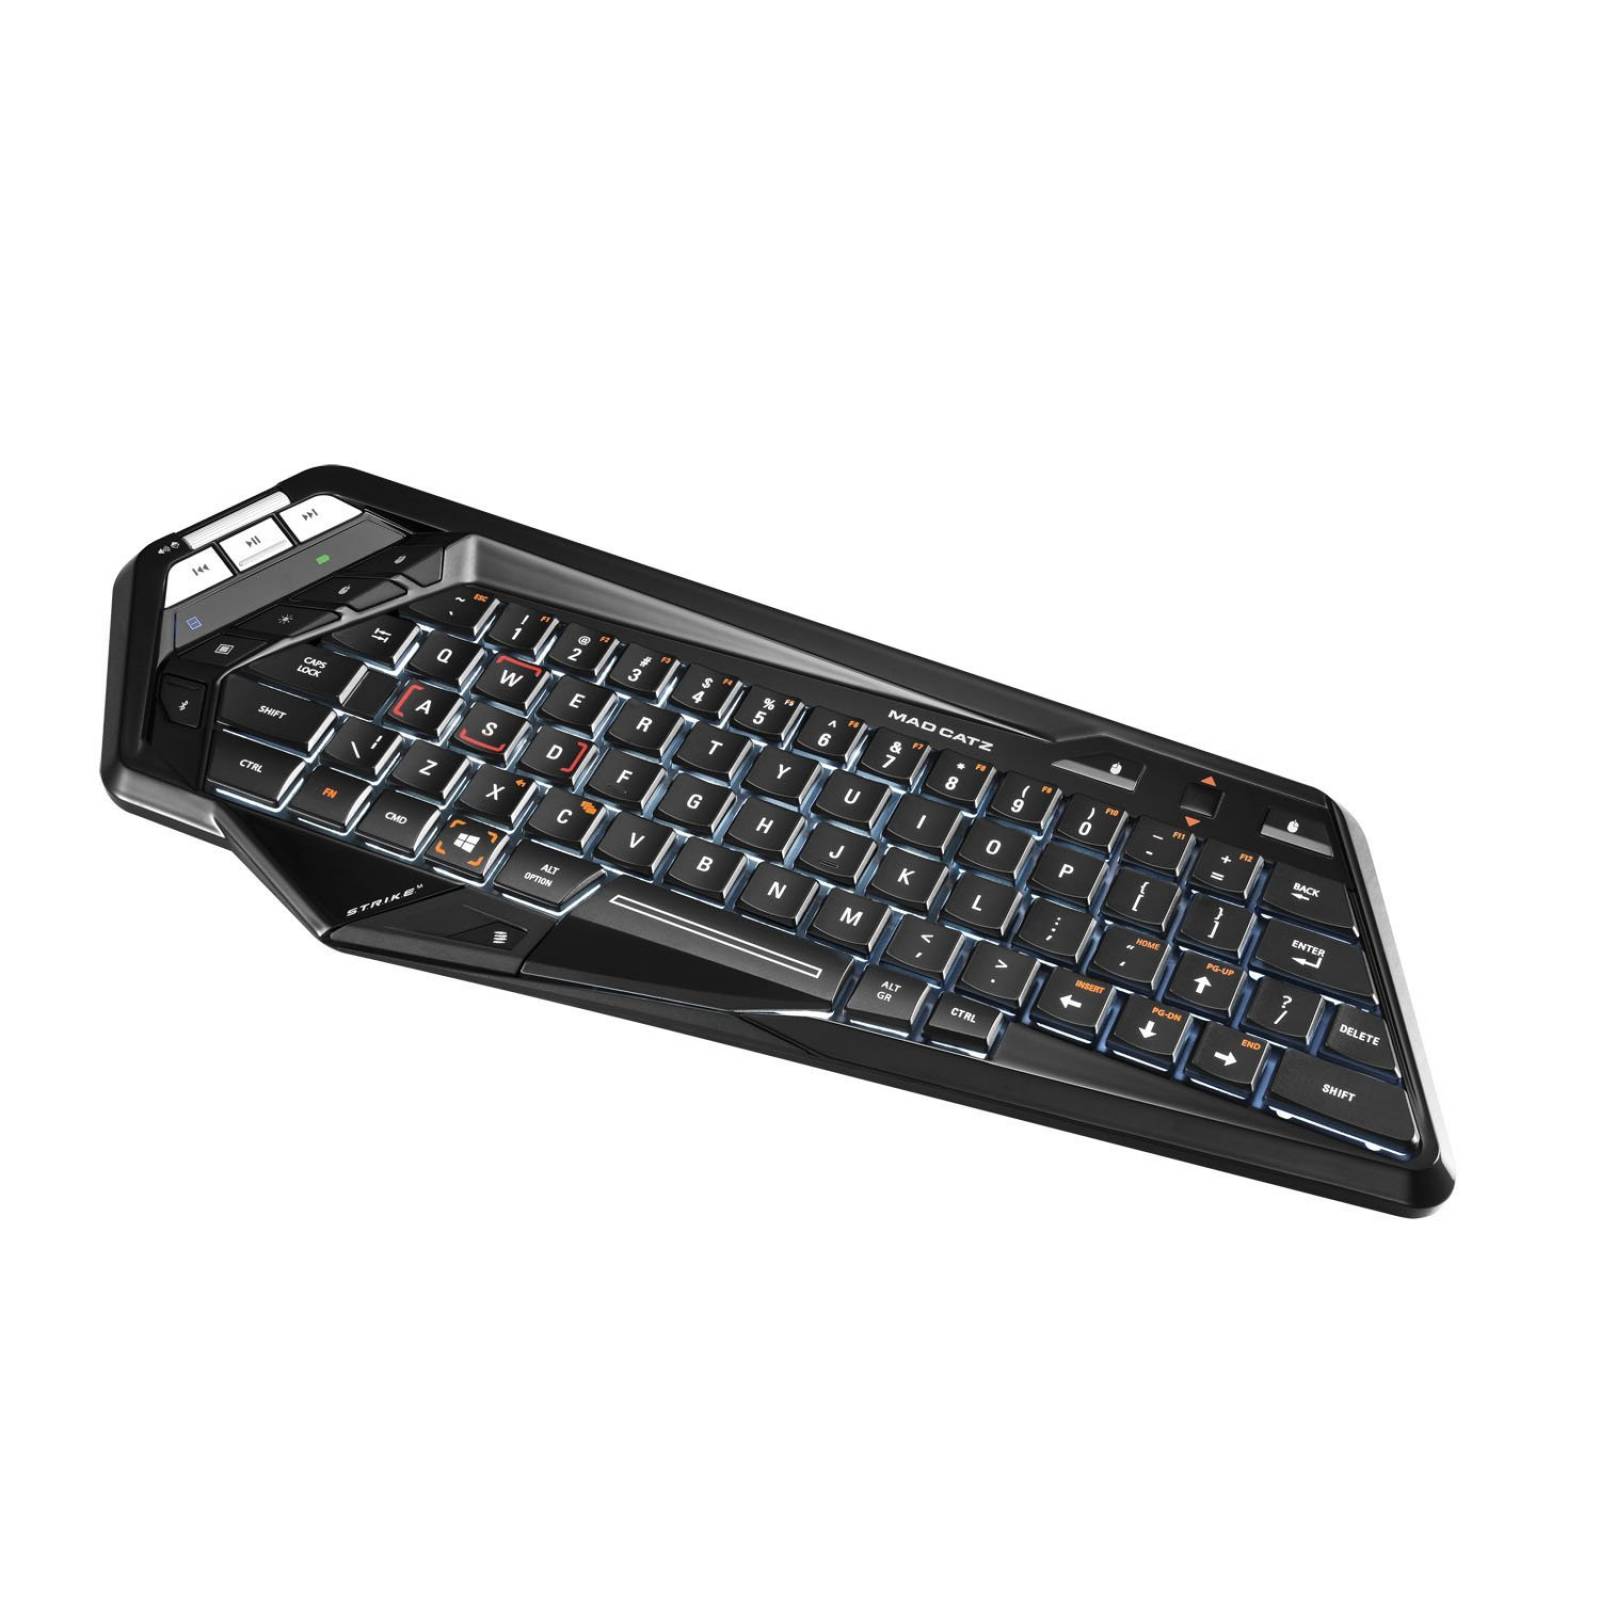 B:Mad Catz S.T.R.I.K.E.M Wireless Keyboard Android y Wi -Negro